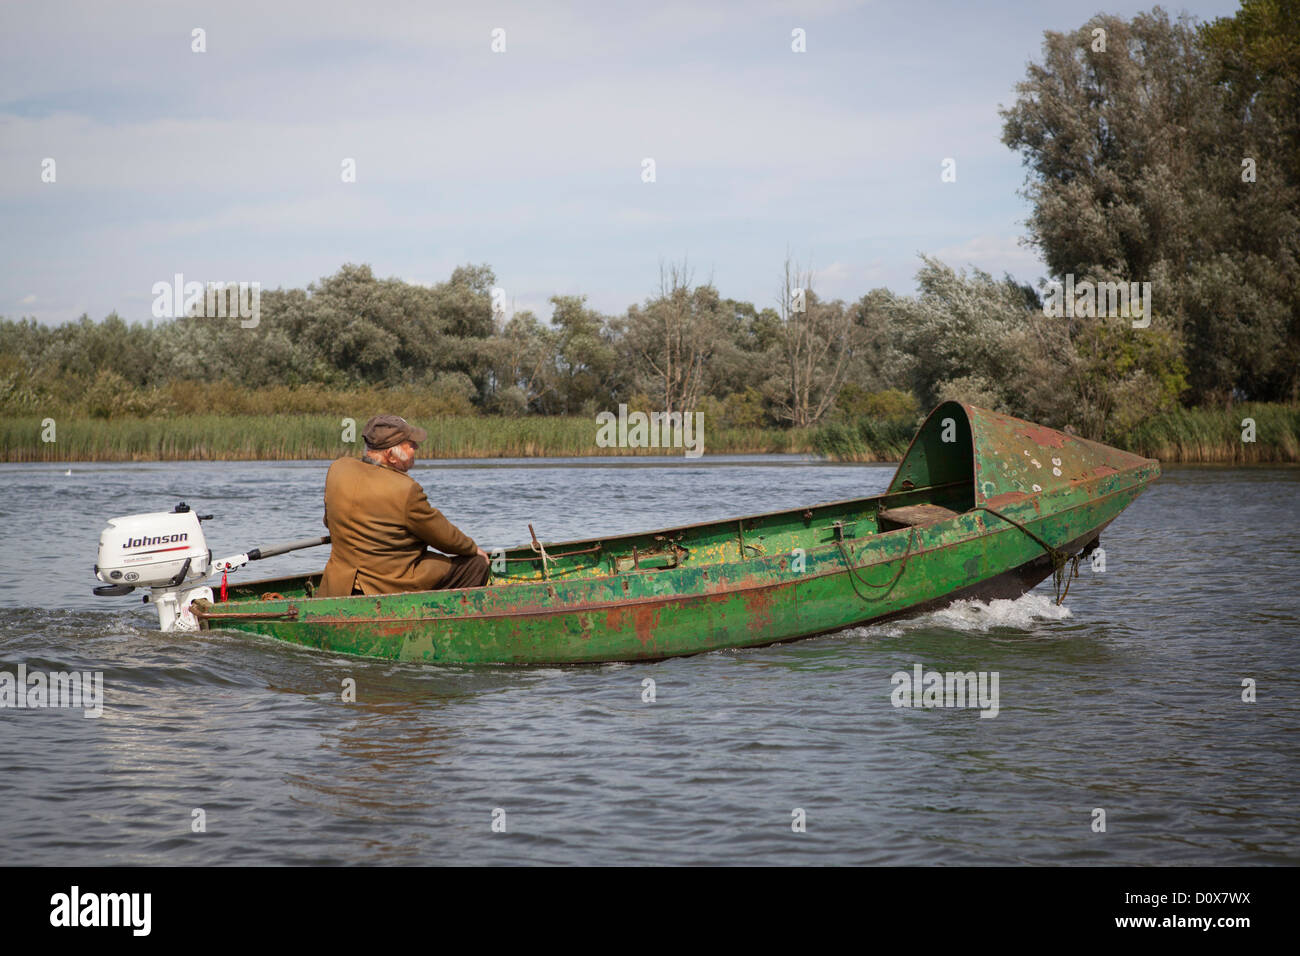 Local fisherman in an old boat on the river in National Park de Biesbosch in the Netherlands Stock Photo